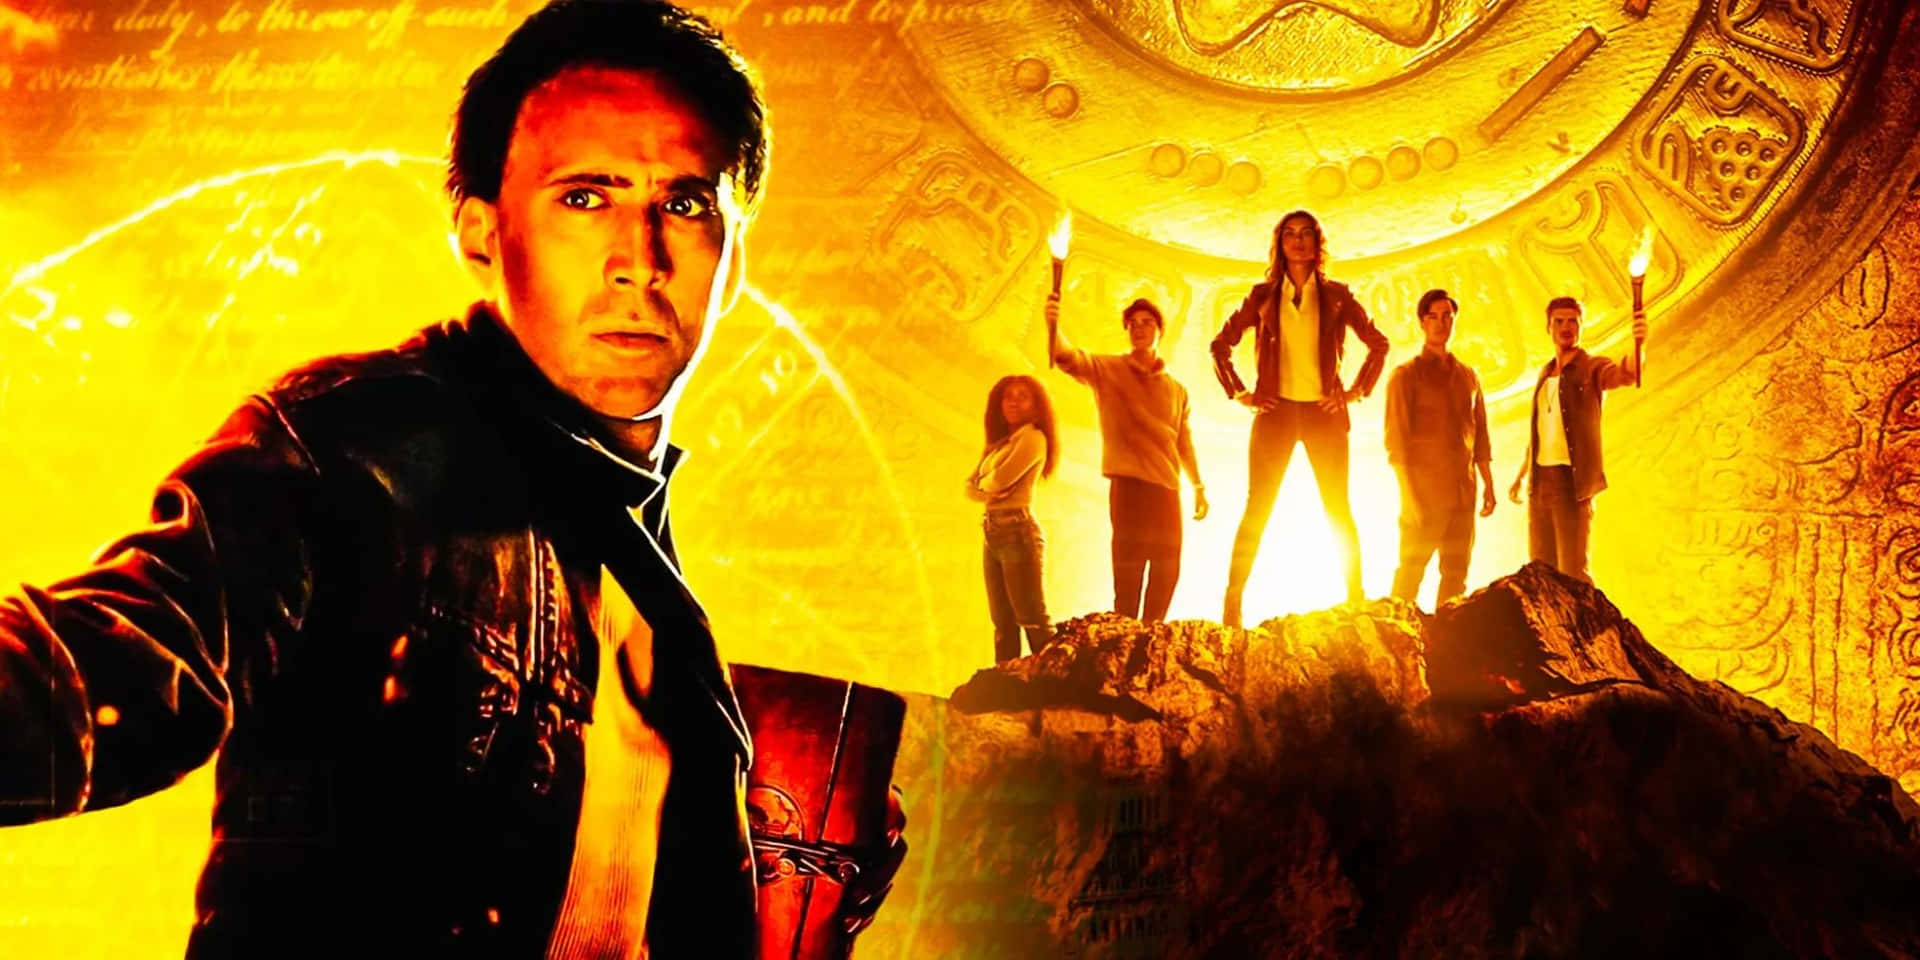 National Treasure movie characters in action Wallpaper